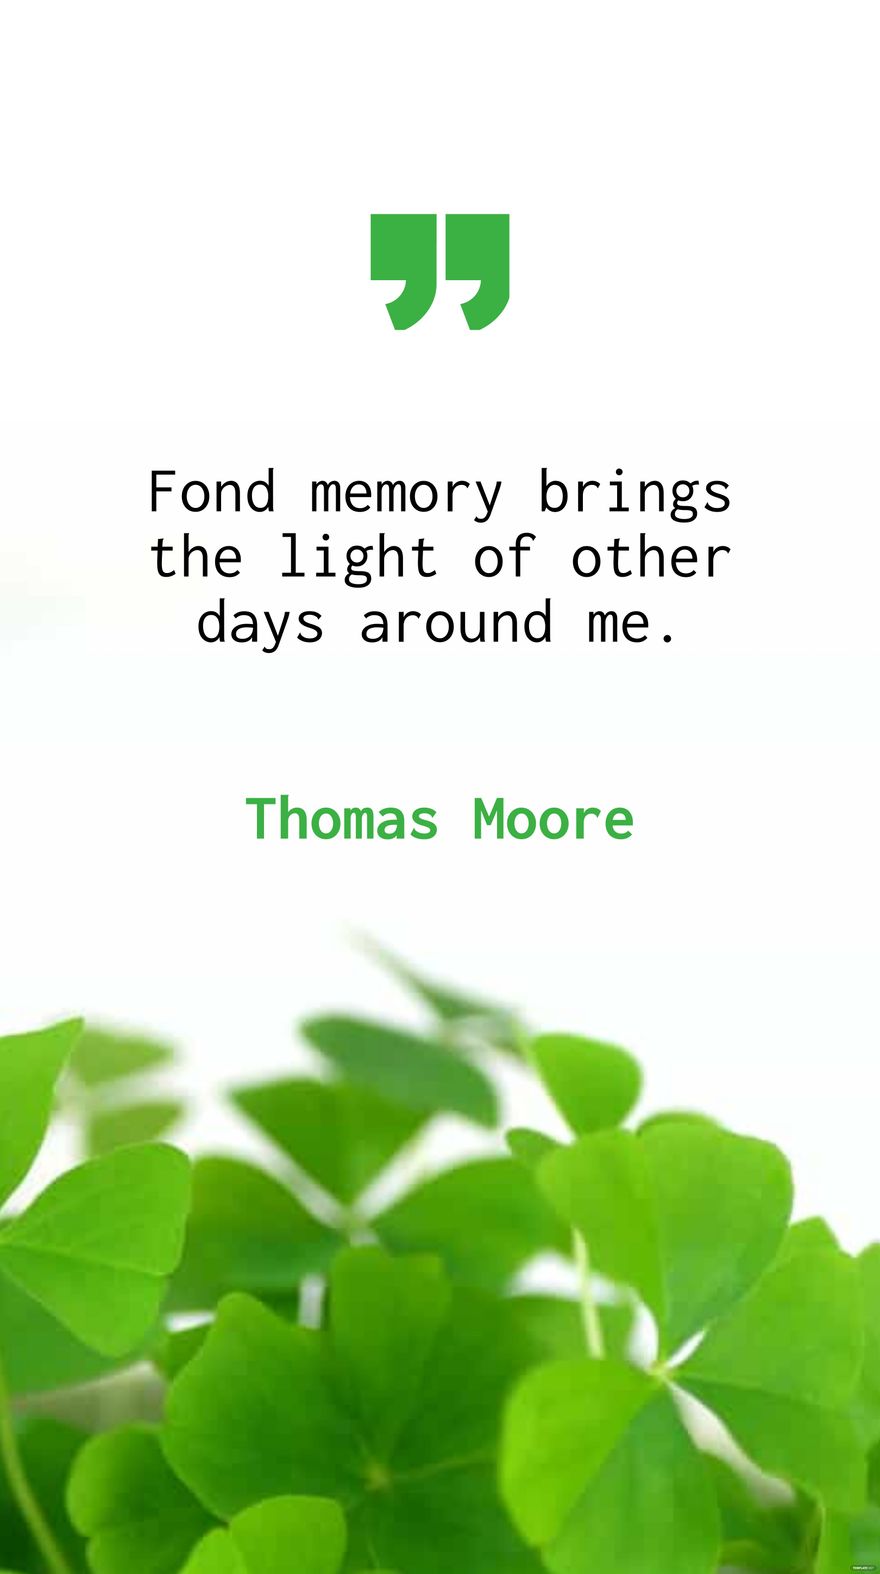 Thomas Moore - Fond memory brings the light of other days around me.